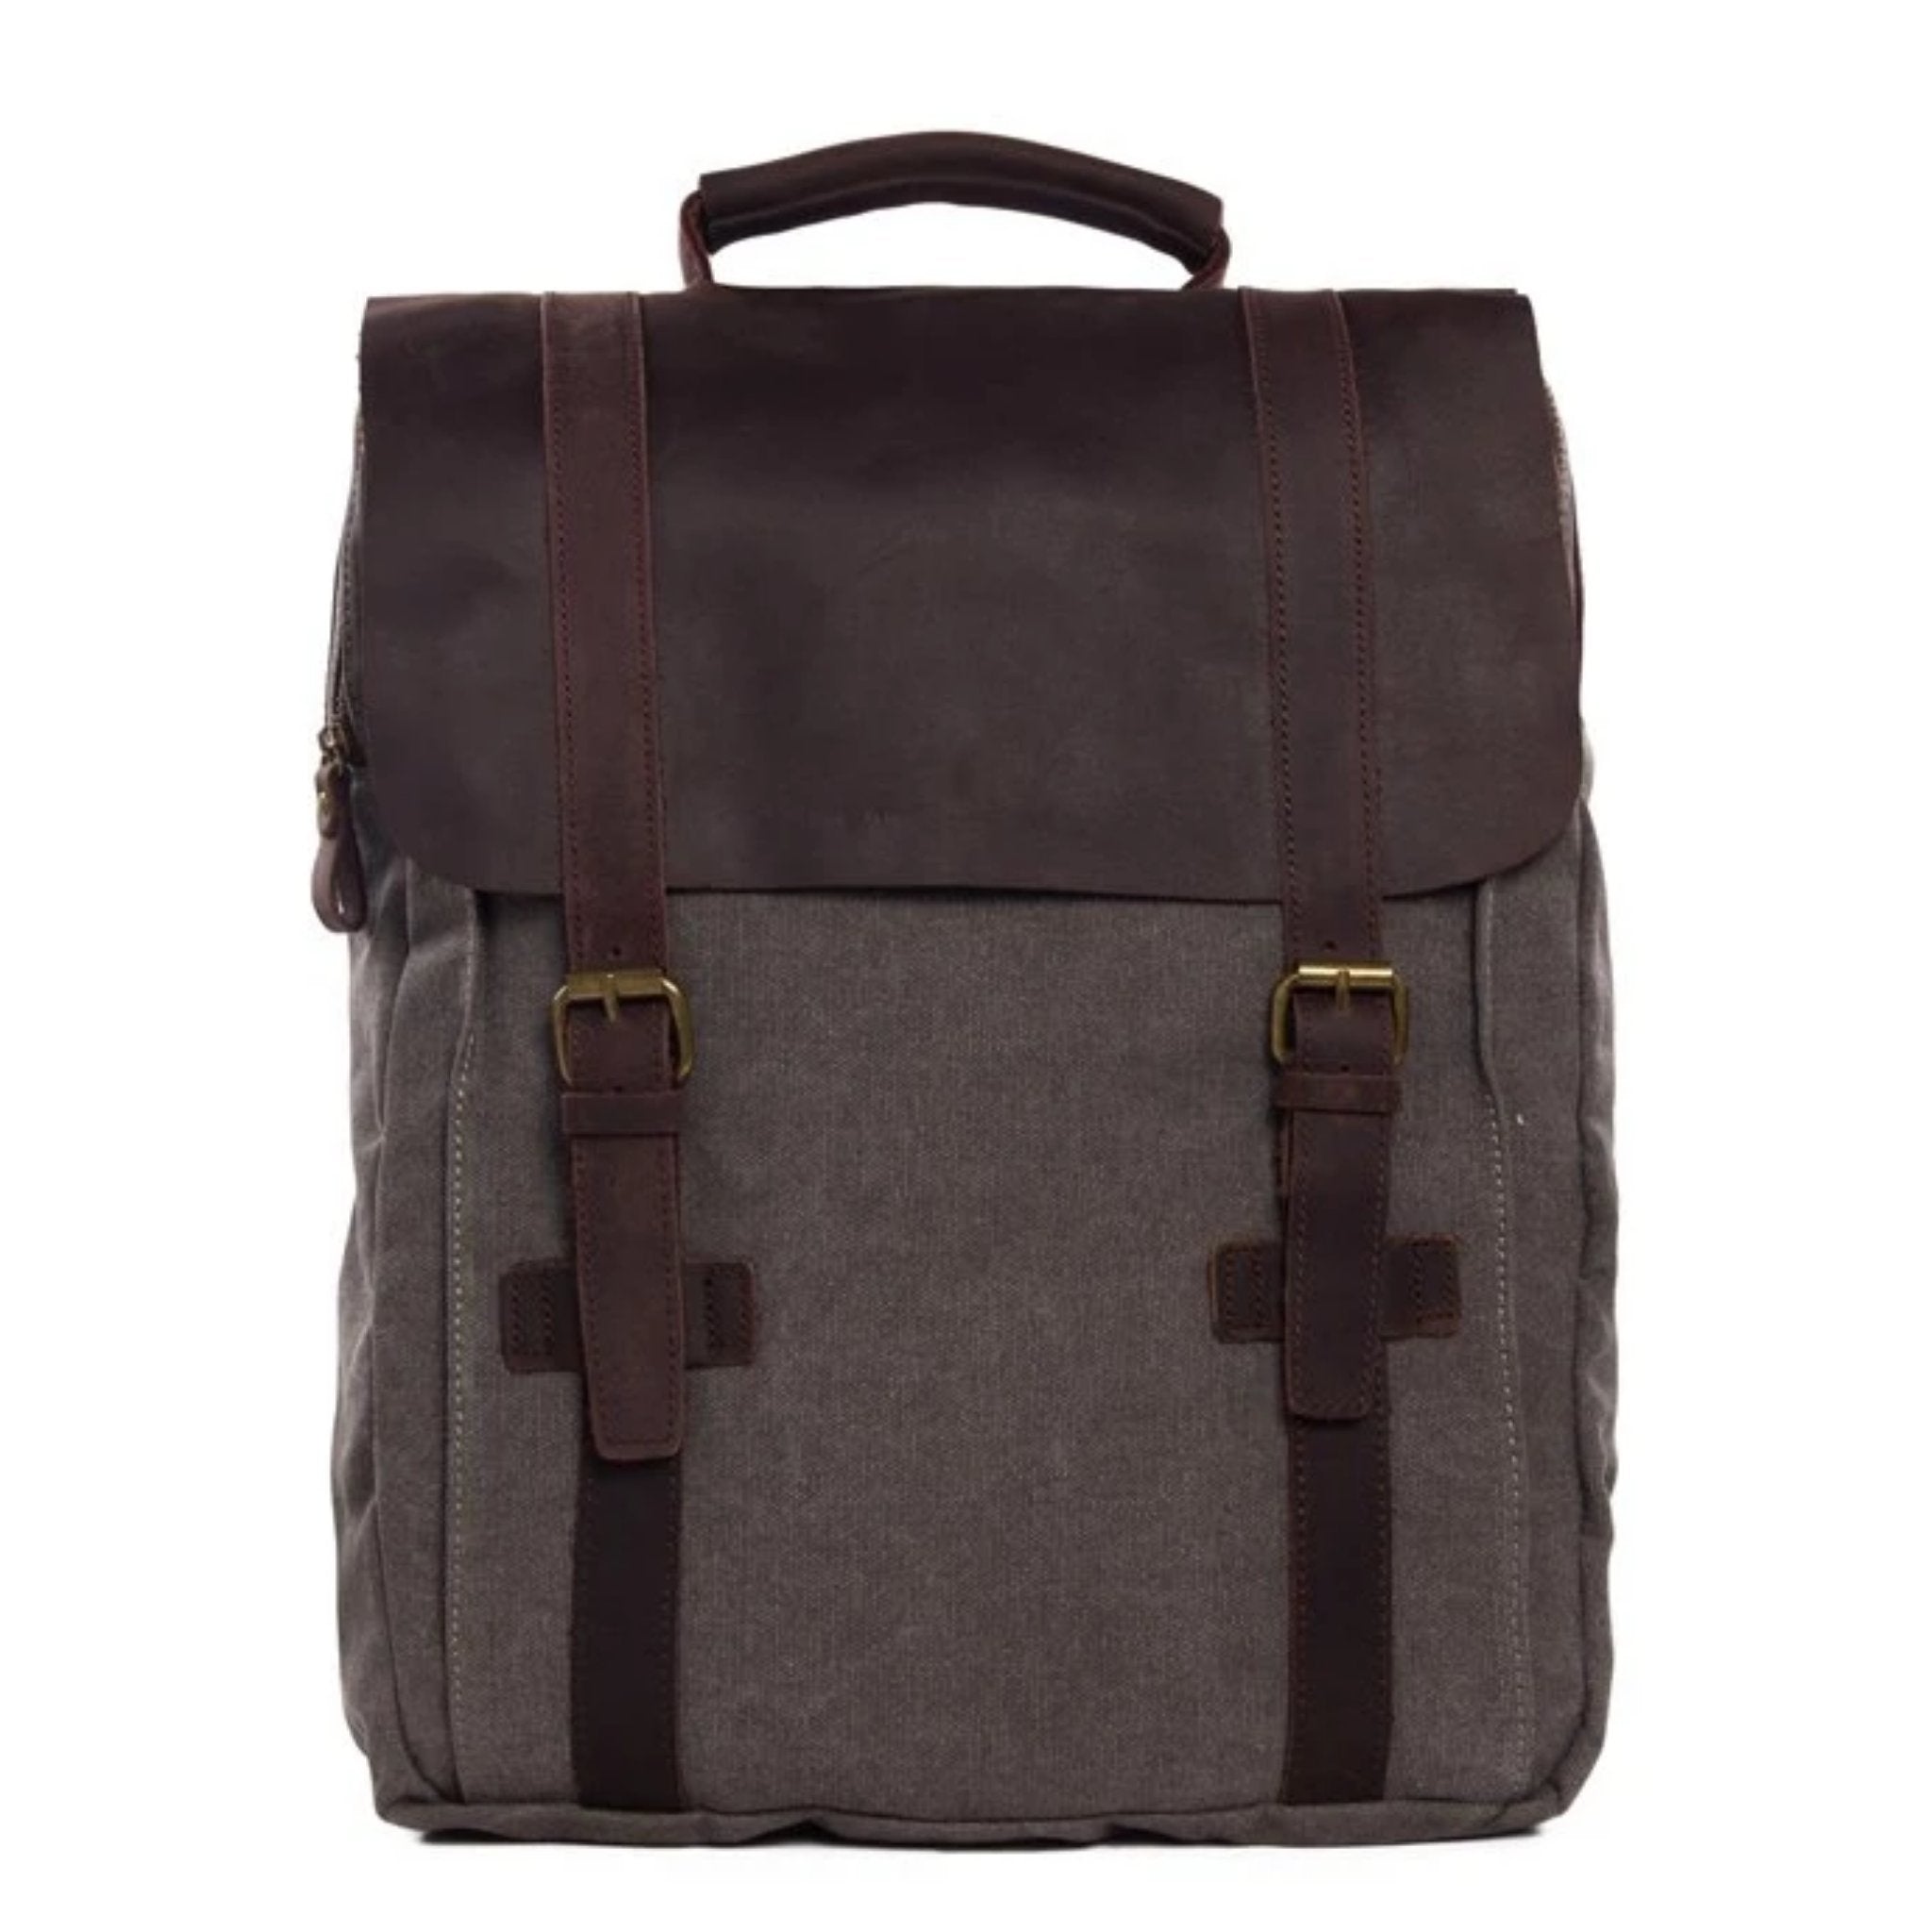 Waxed Canvas and Leather Double strap Backpack - Dark Grey - Blue Sebe Handmade Leather Bags